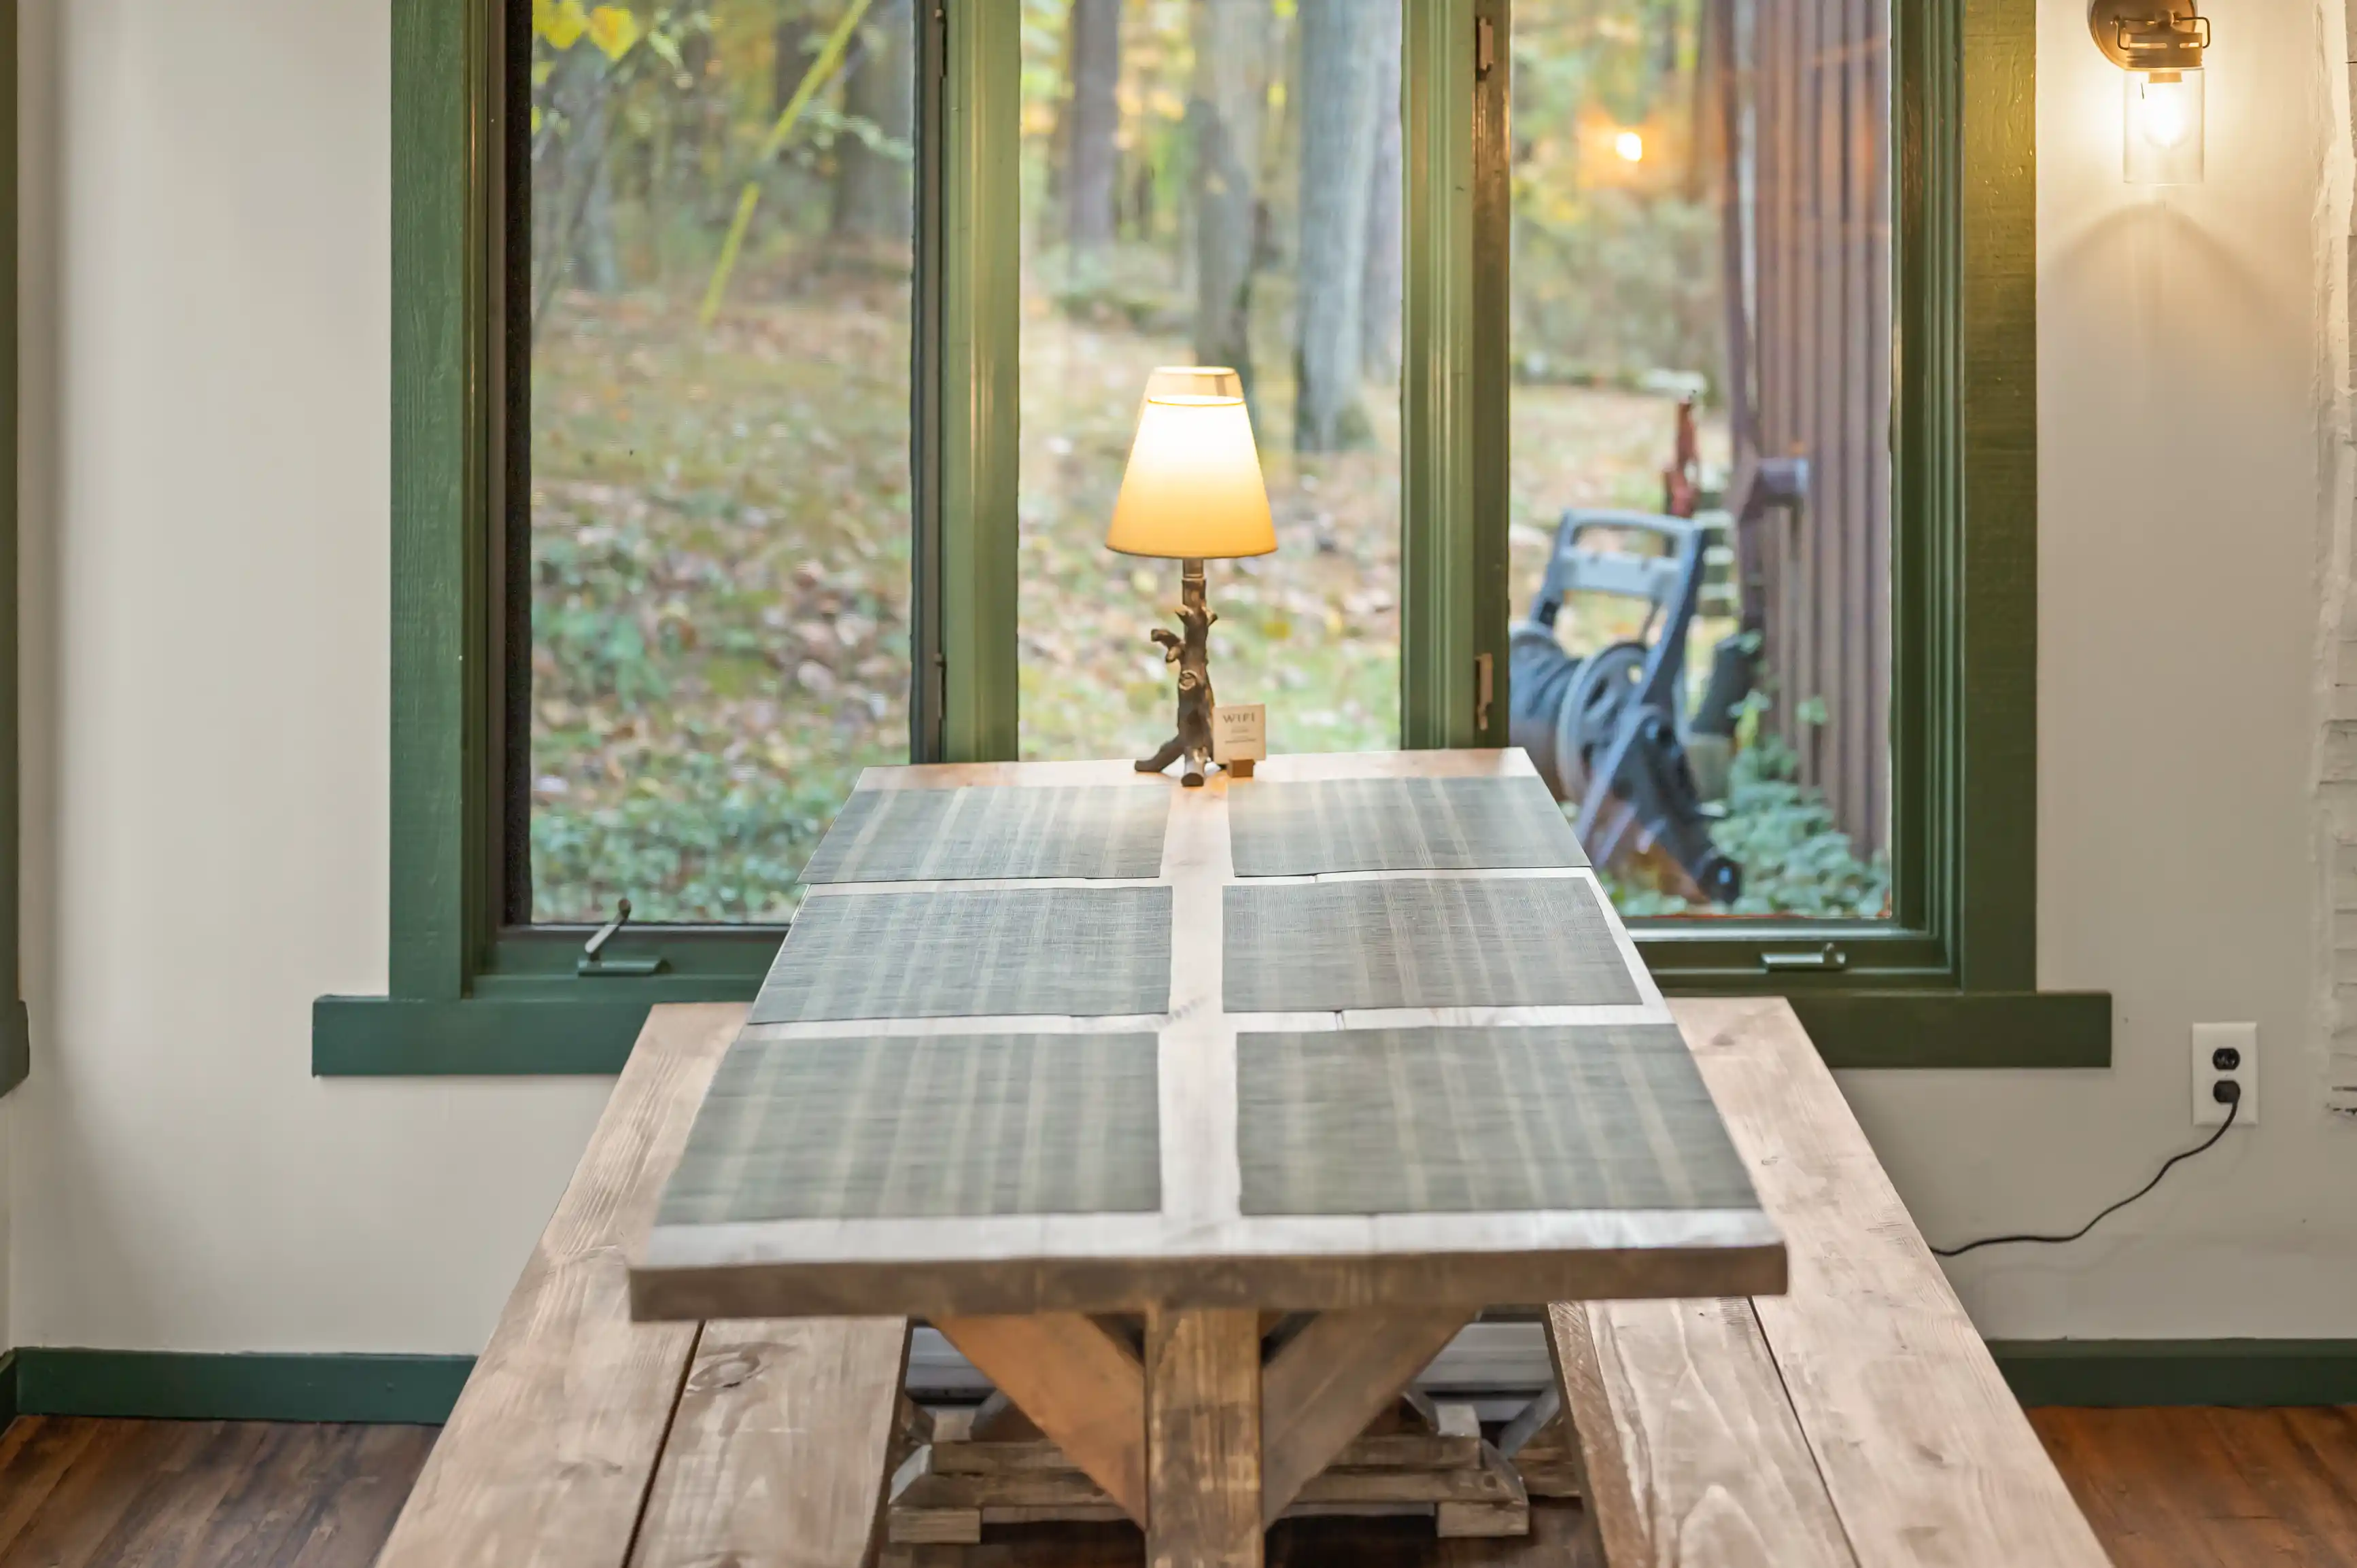 Cozy interior view of a rustic wooden table with an open book and a lamp, by a window overlooking a forest.